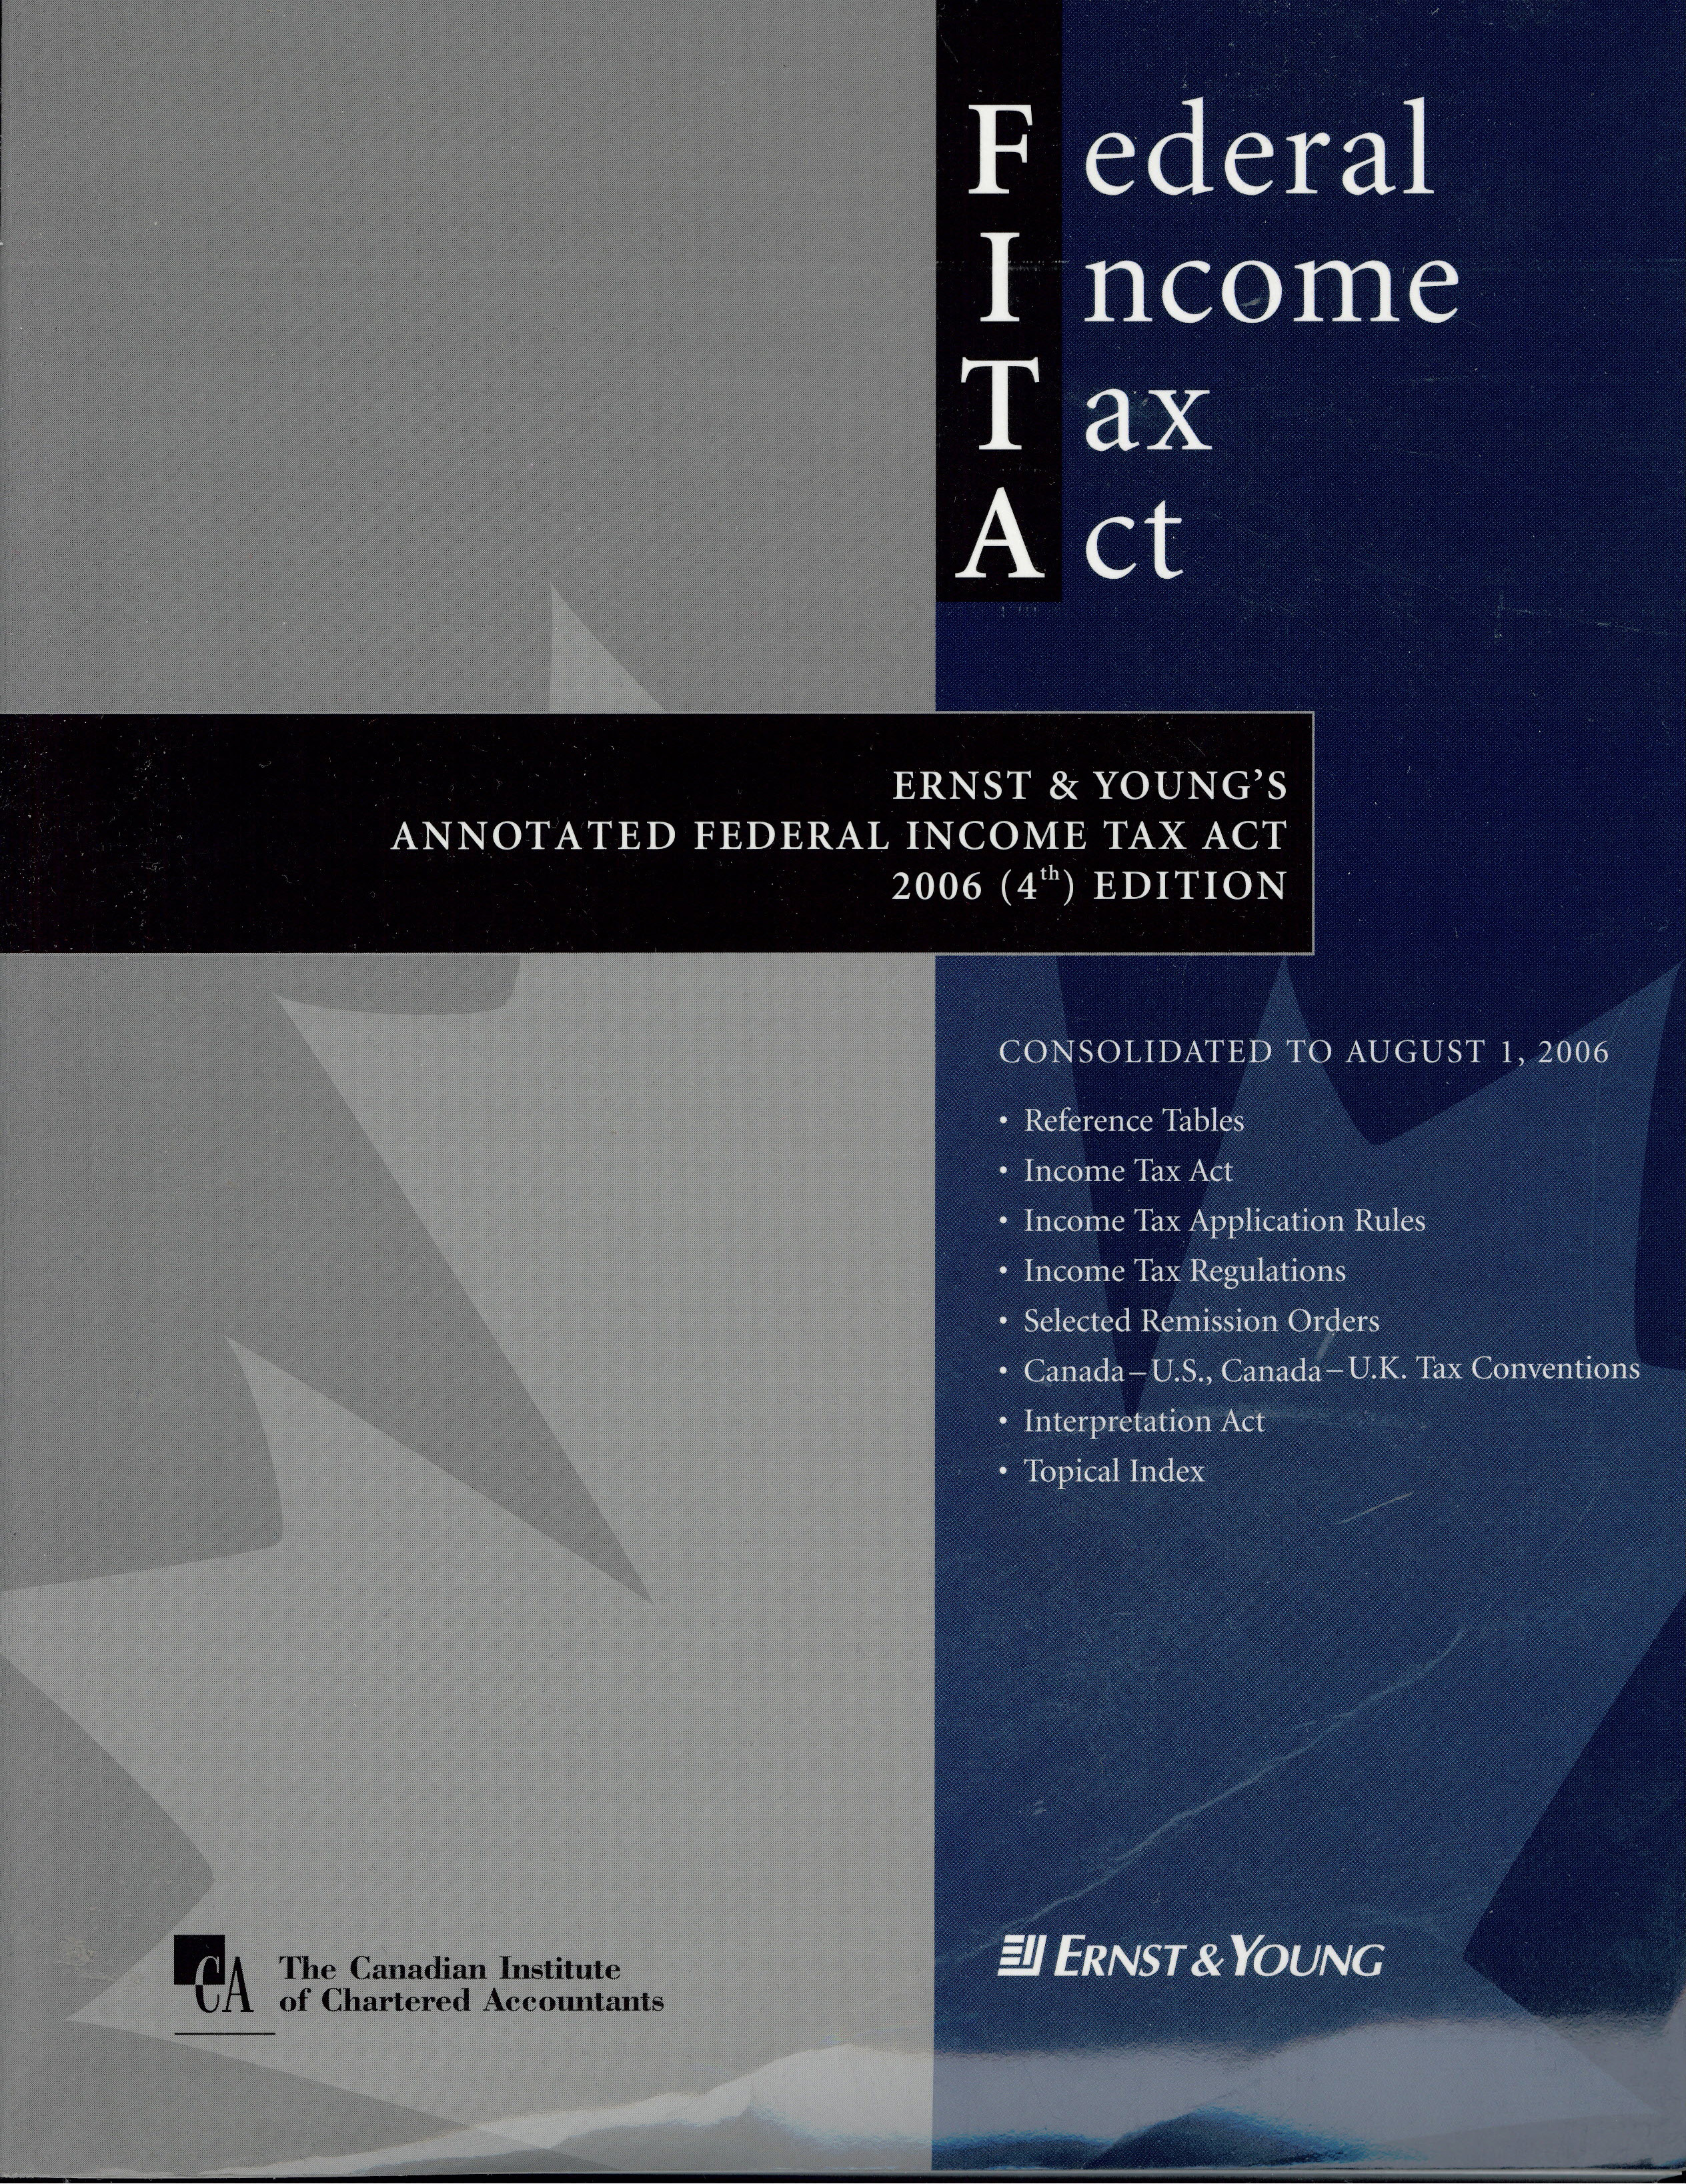 Ernst & Young's annotated federal Income Tax Act (FITA)